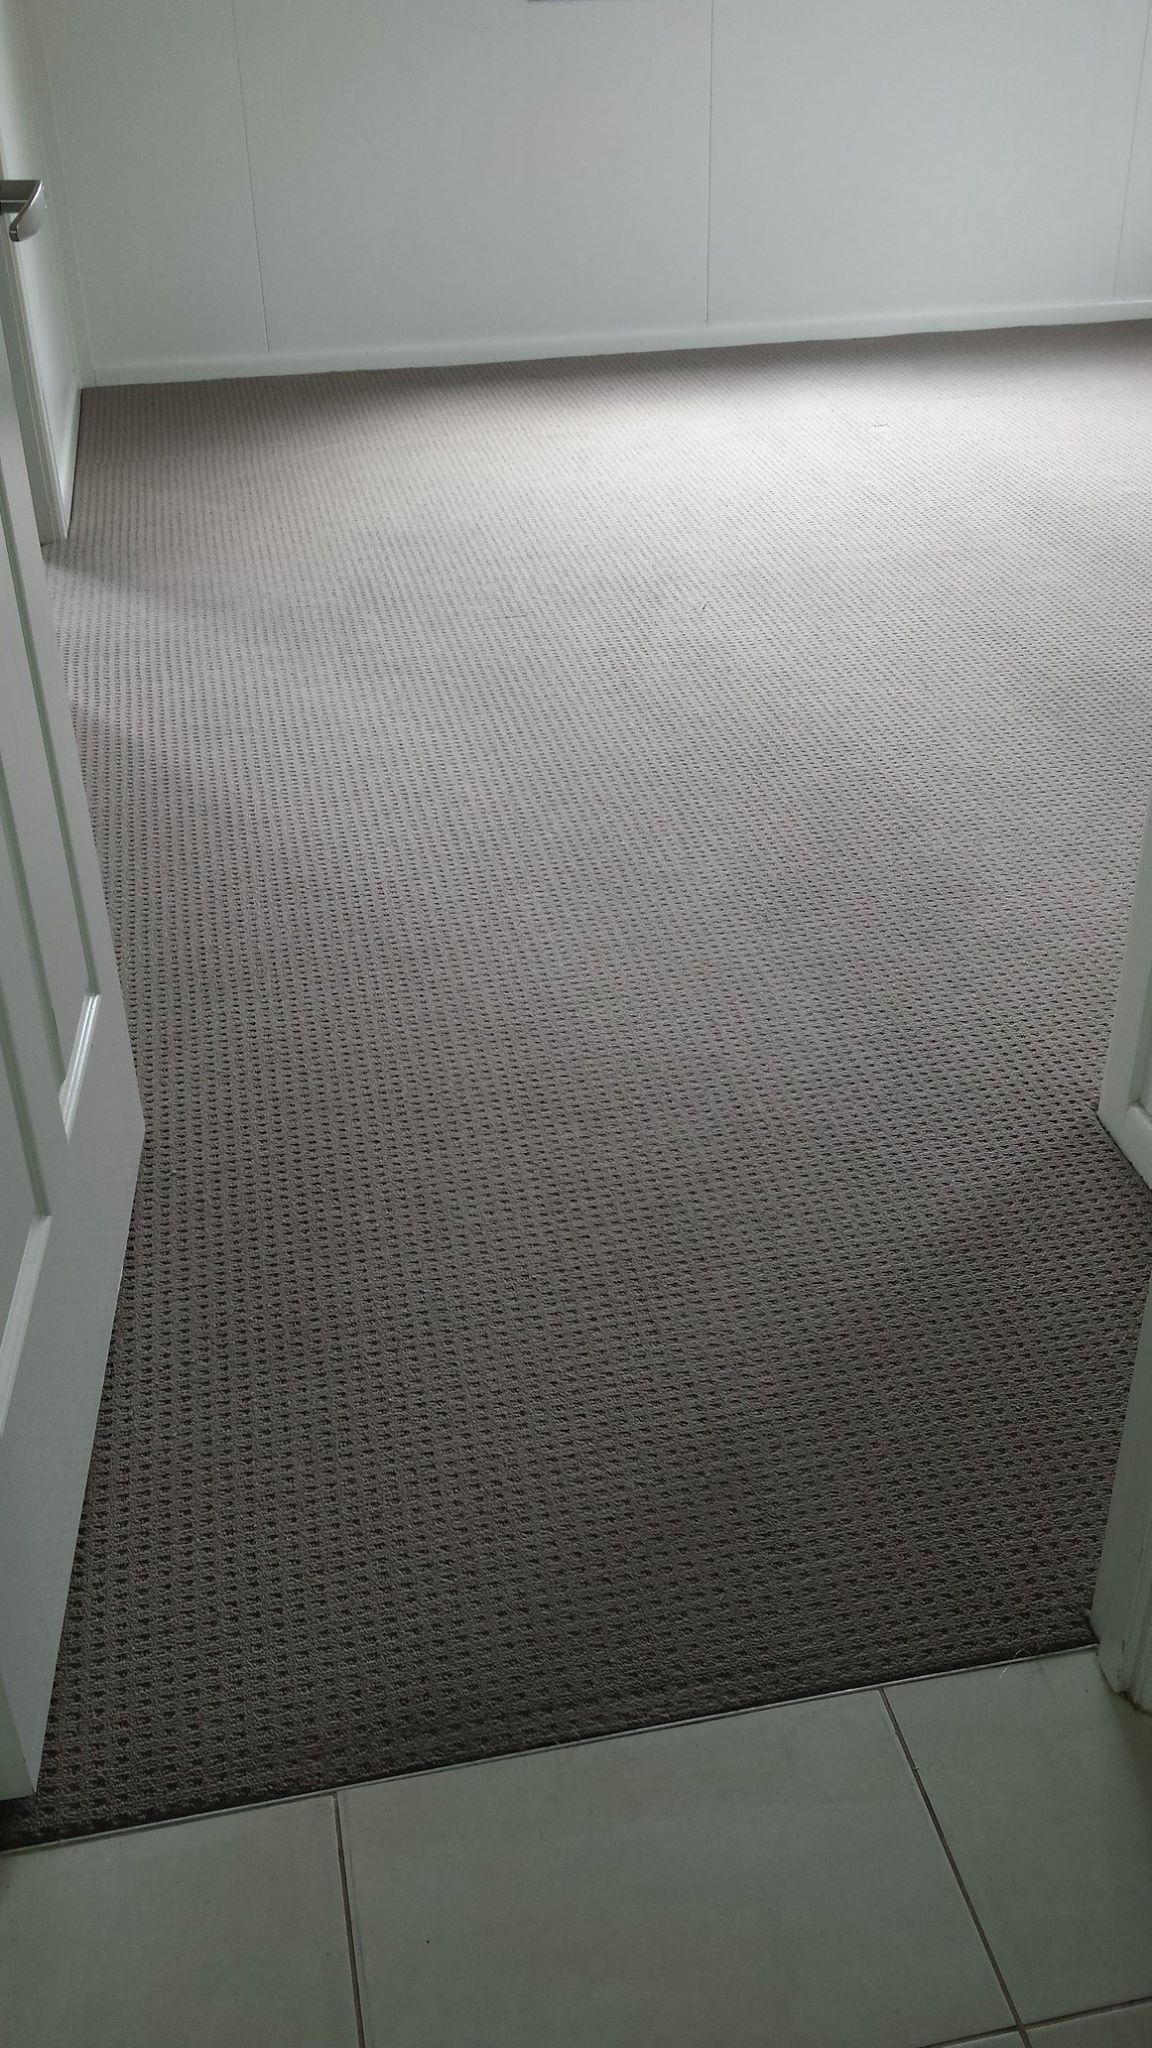 Carpet After Cleaning — Carpet Cleaning Services in Norman Gardens, QLD